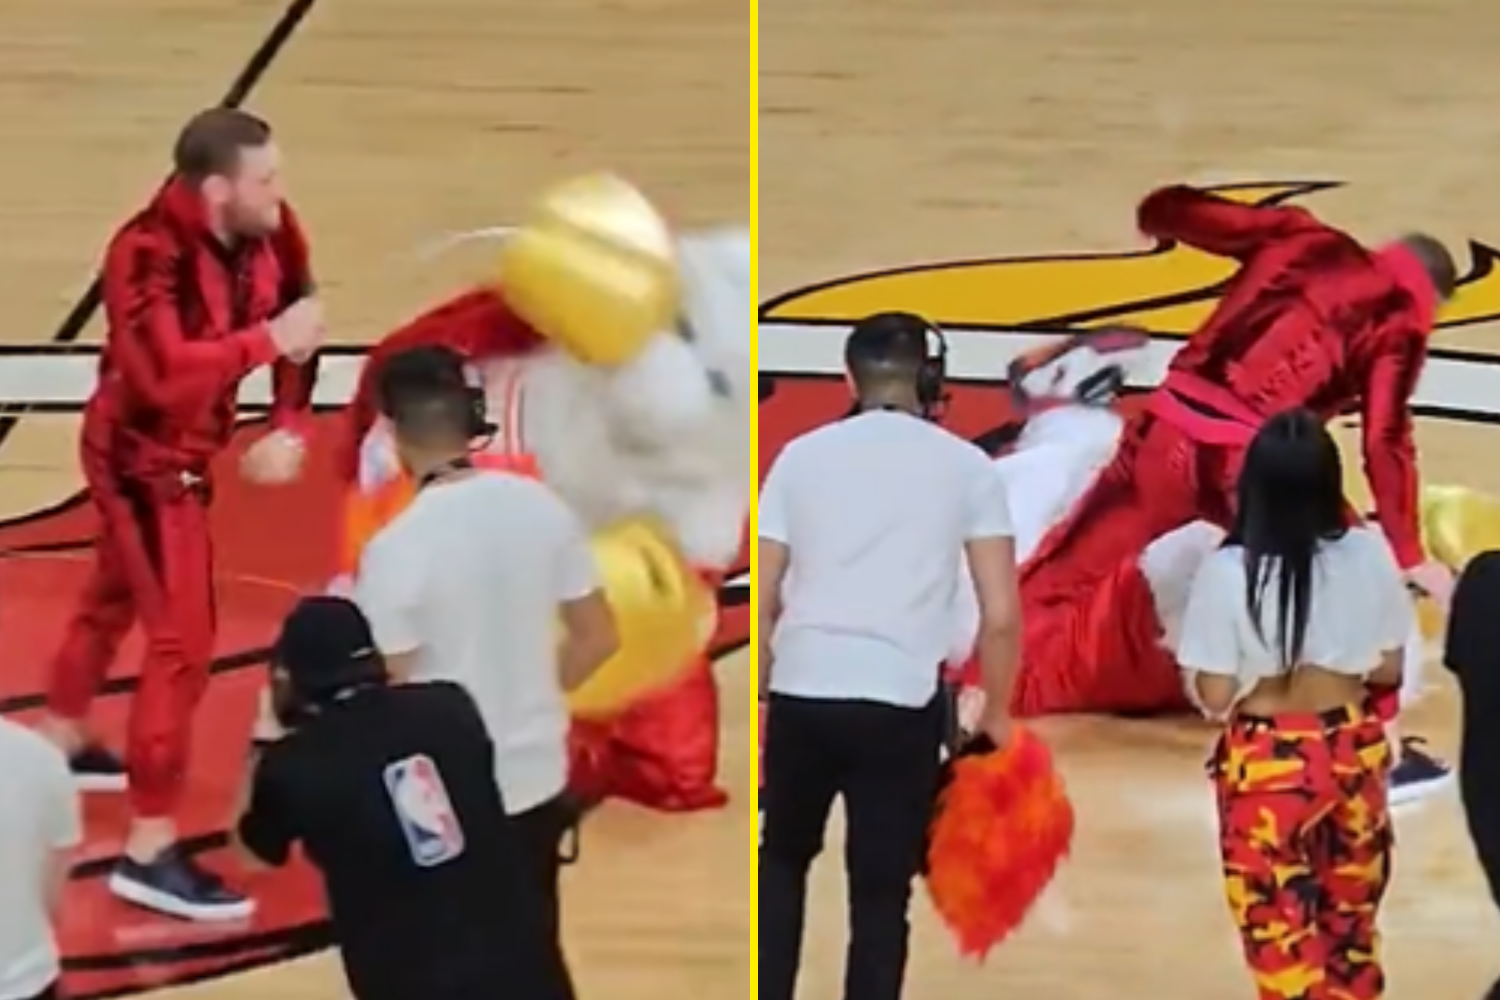 UFC superstar Conor McGregor sends Miami Heat mascot to hospital after NBA final stunt goes wrong